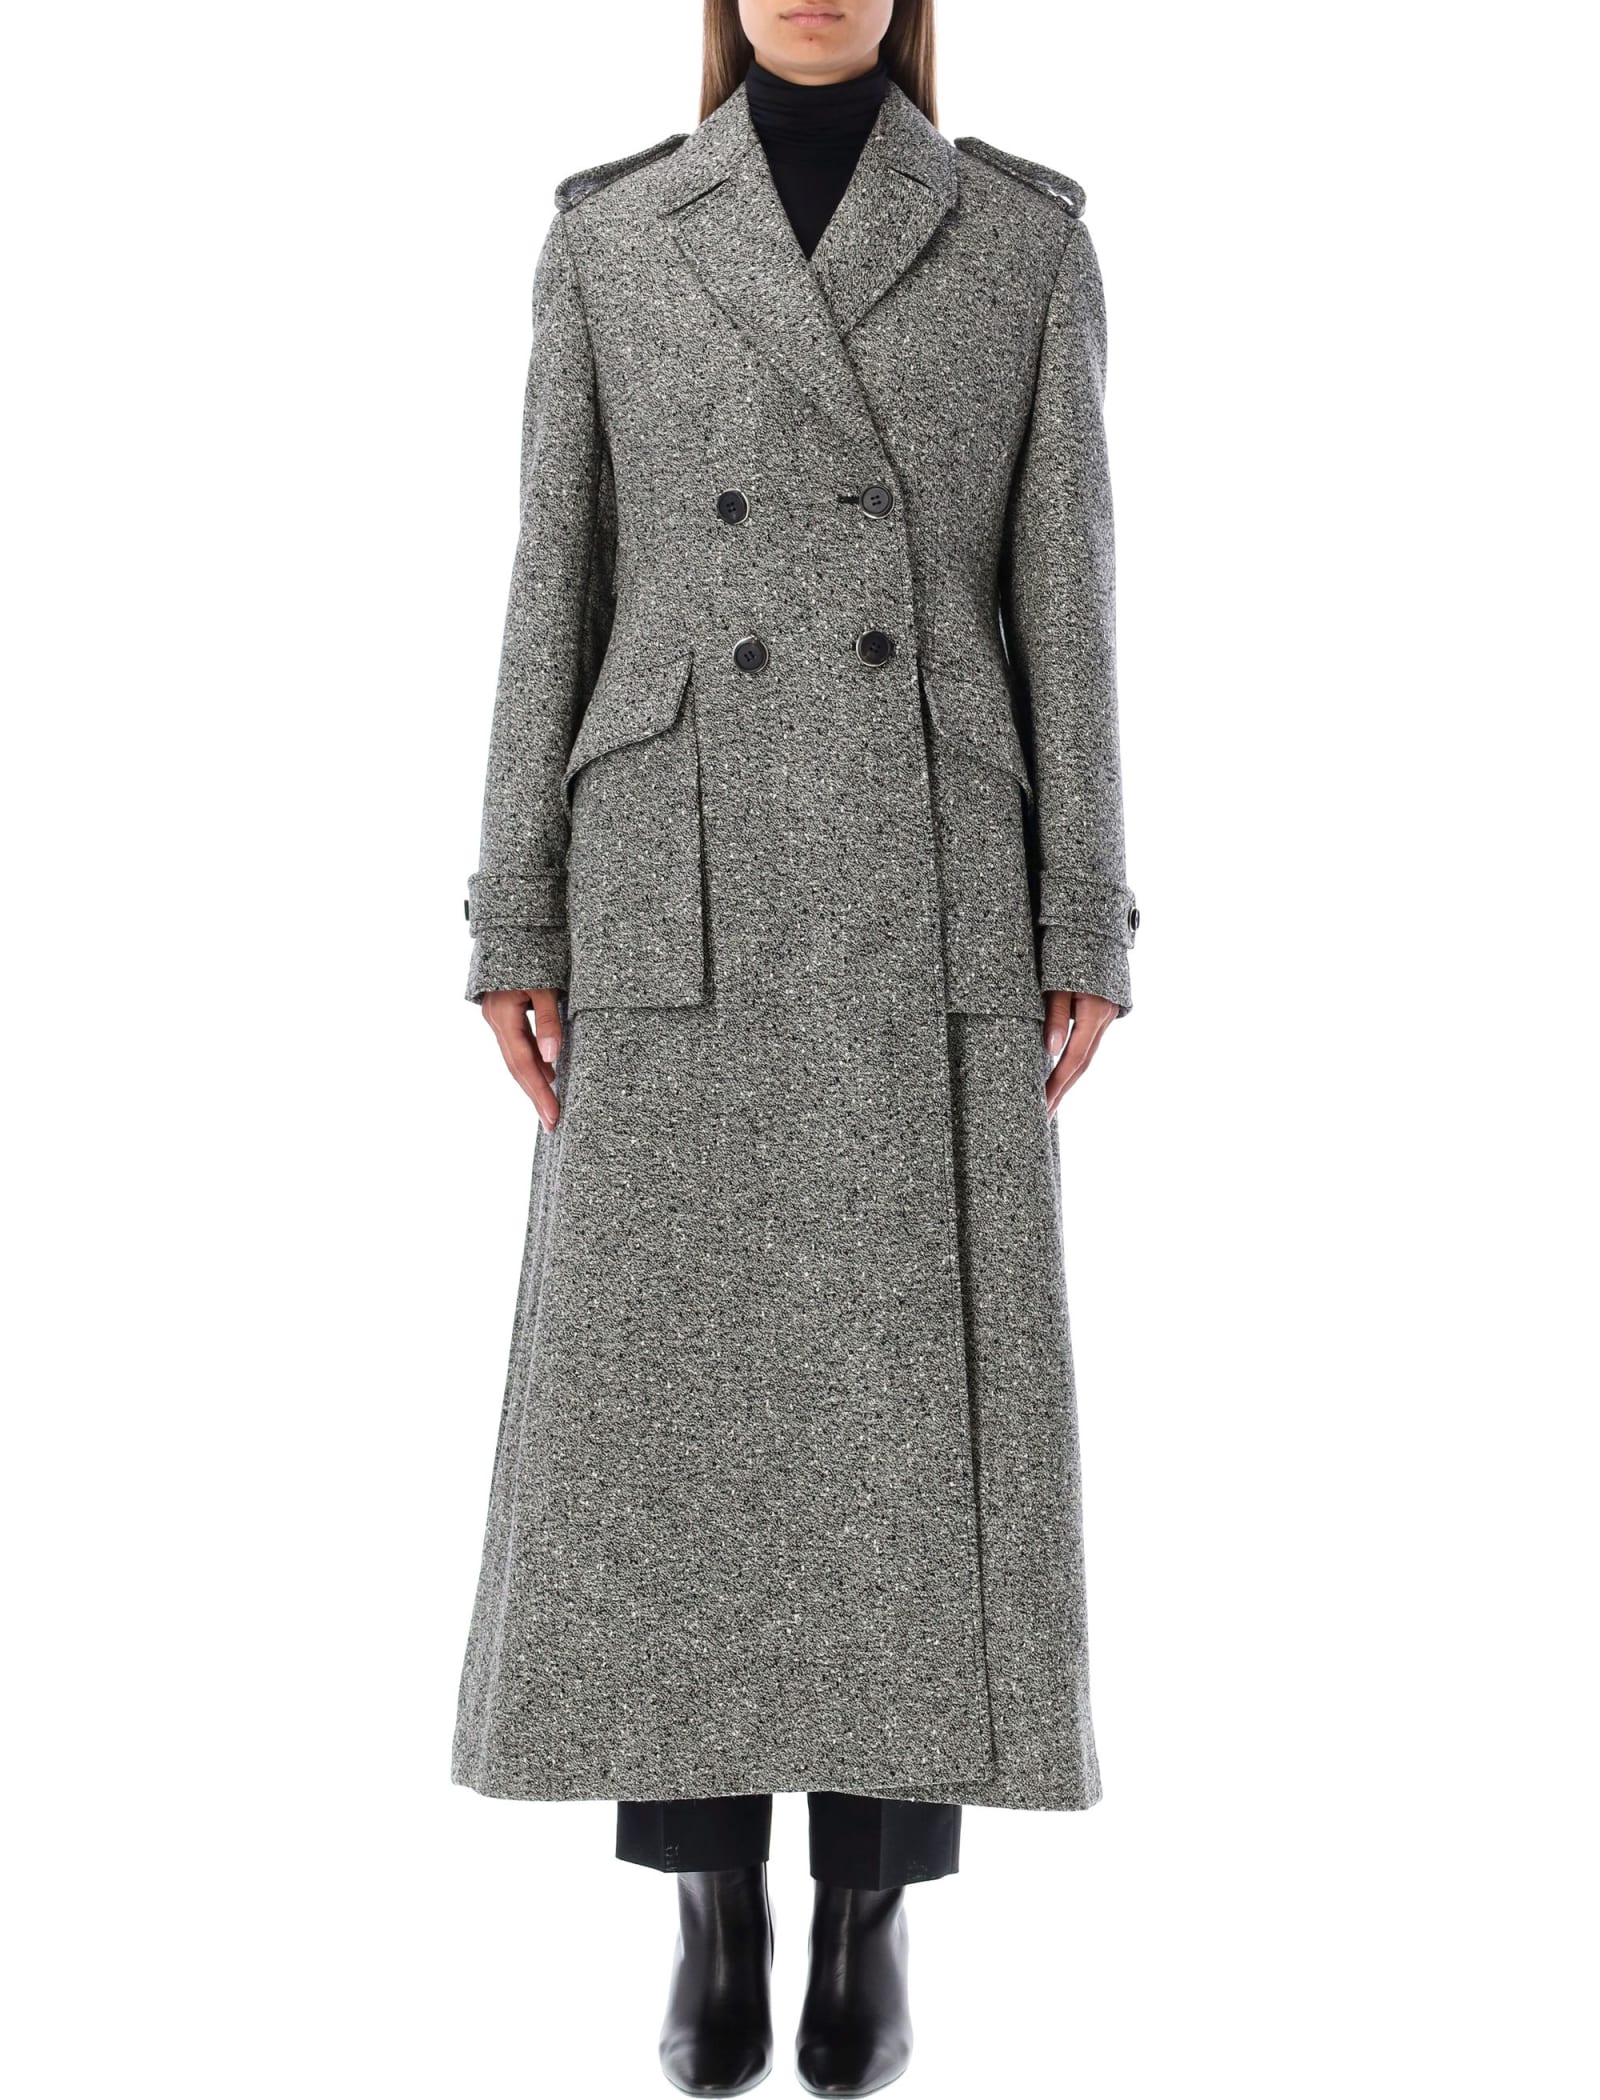 Durazzi Milano Virgin Wool Single Breasted Trench Coat